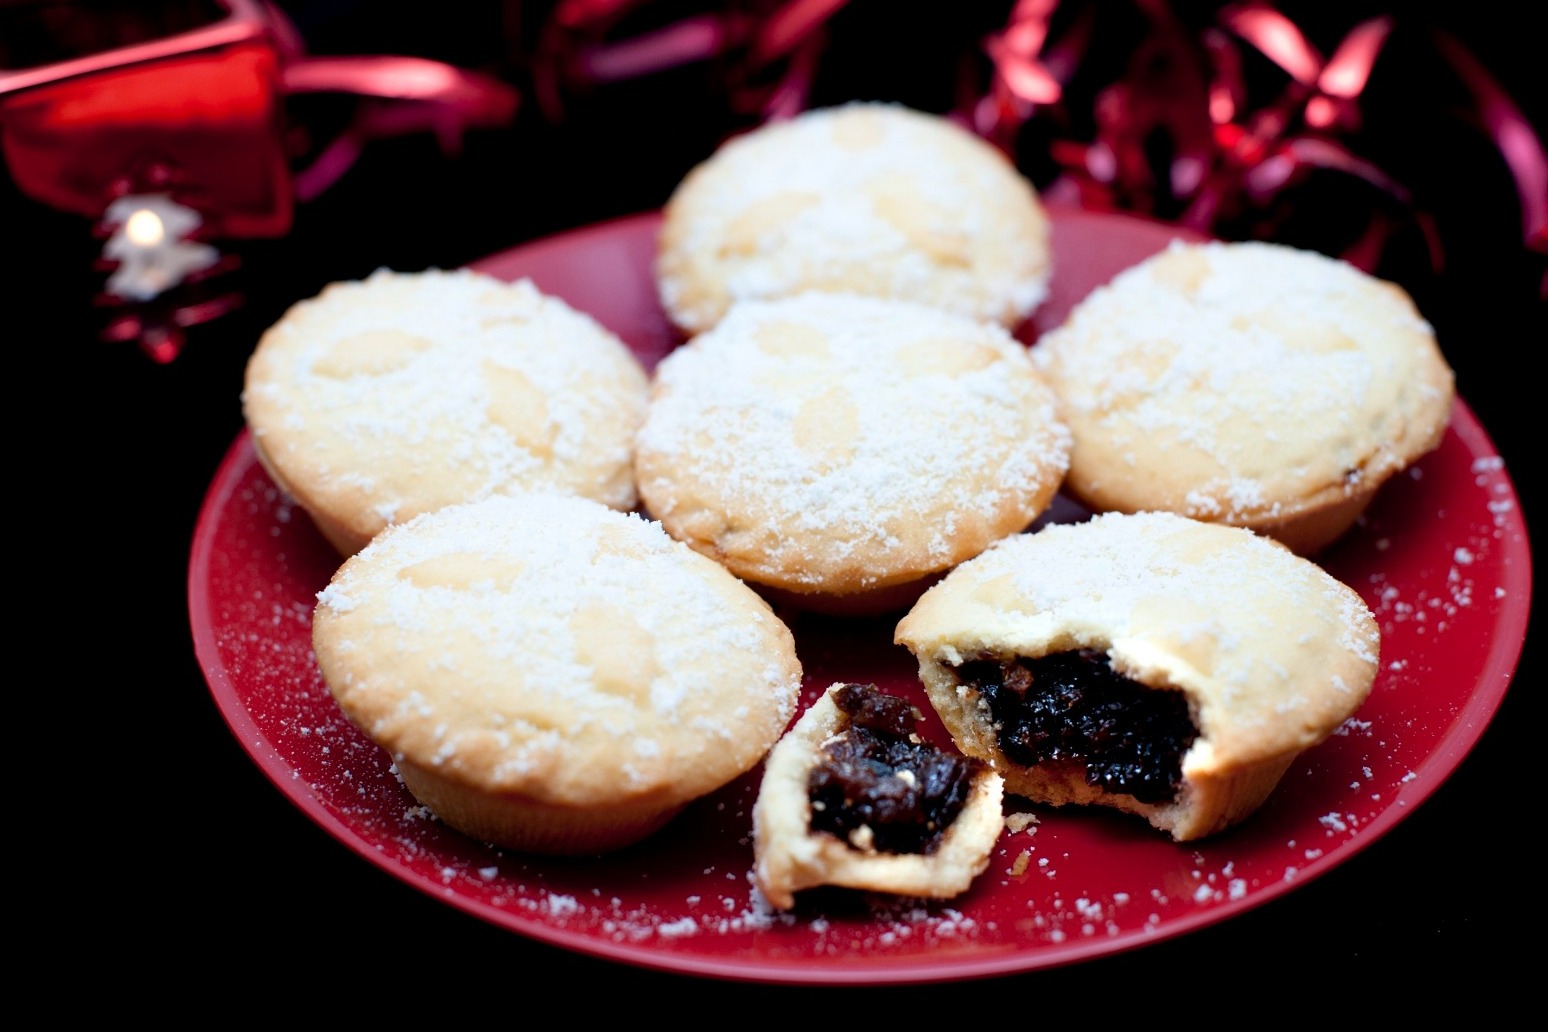 Mince pie quality auditor and snow clearance specialist among jobs on offer 